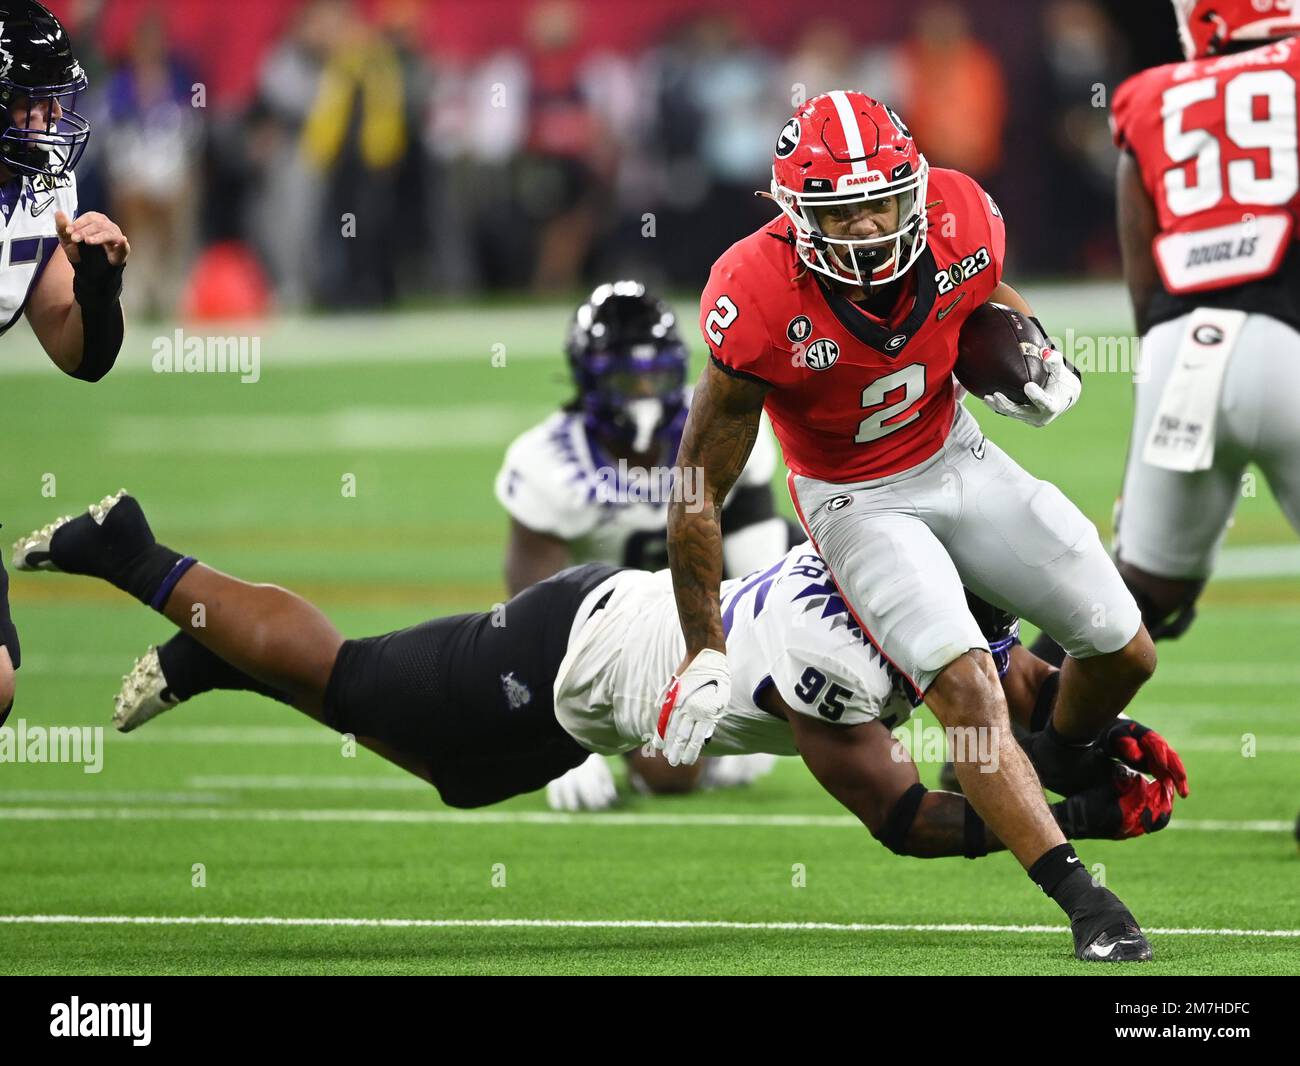 Inglewood, United States. 09th Jan, 2023. Georgia Bulldogs runningback Kendall Milton carries the football in the first quarter against the TCU Horned Frogs at the 2023 NCAA College Football National Championship between Georgia and TCU at SoFi Stadium in Inglewood, California, on Monday, January 9, 2023. Photo by Mike Goulding/UPI Credit: UPI/Alamy Live News Stock Photo